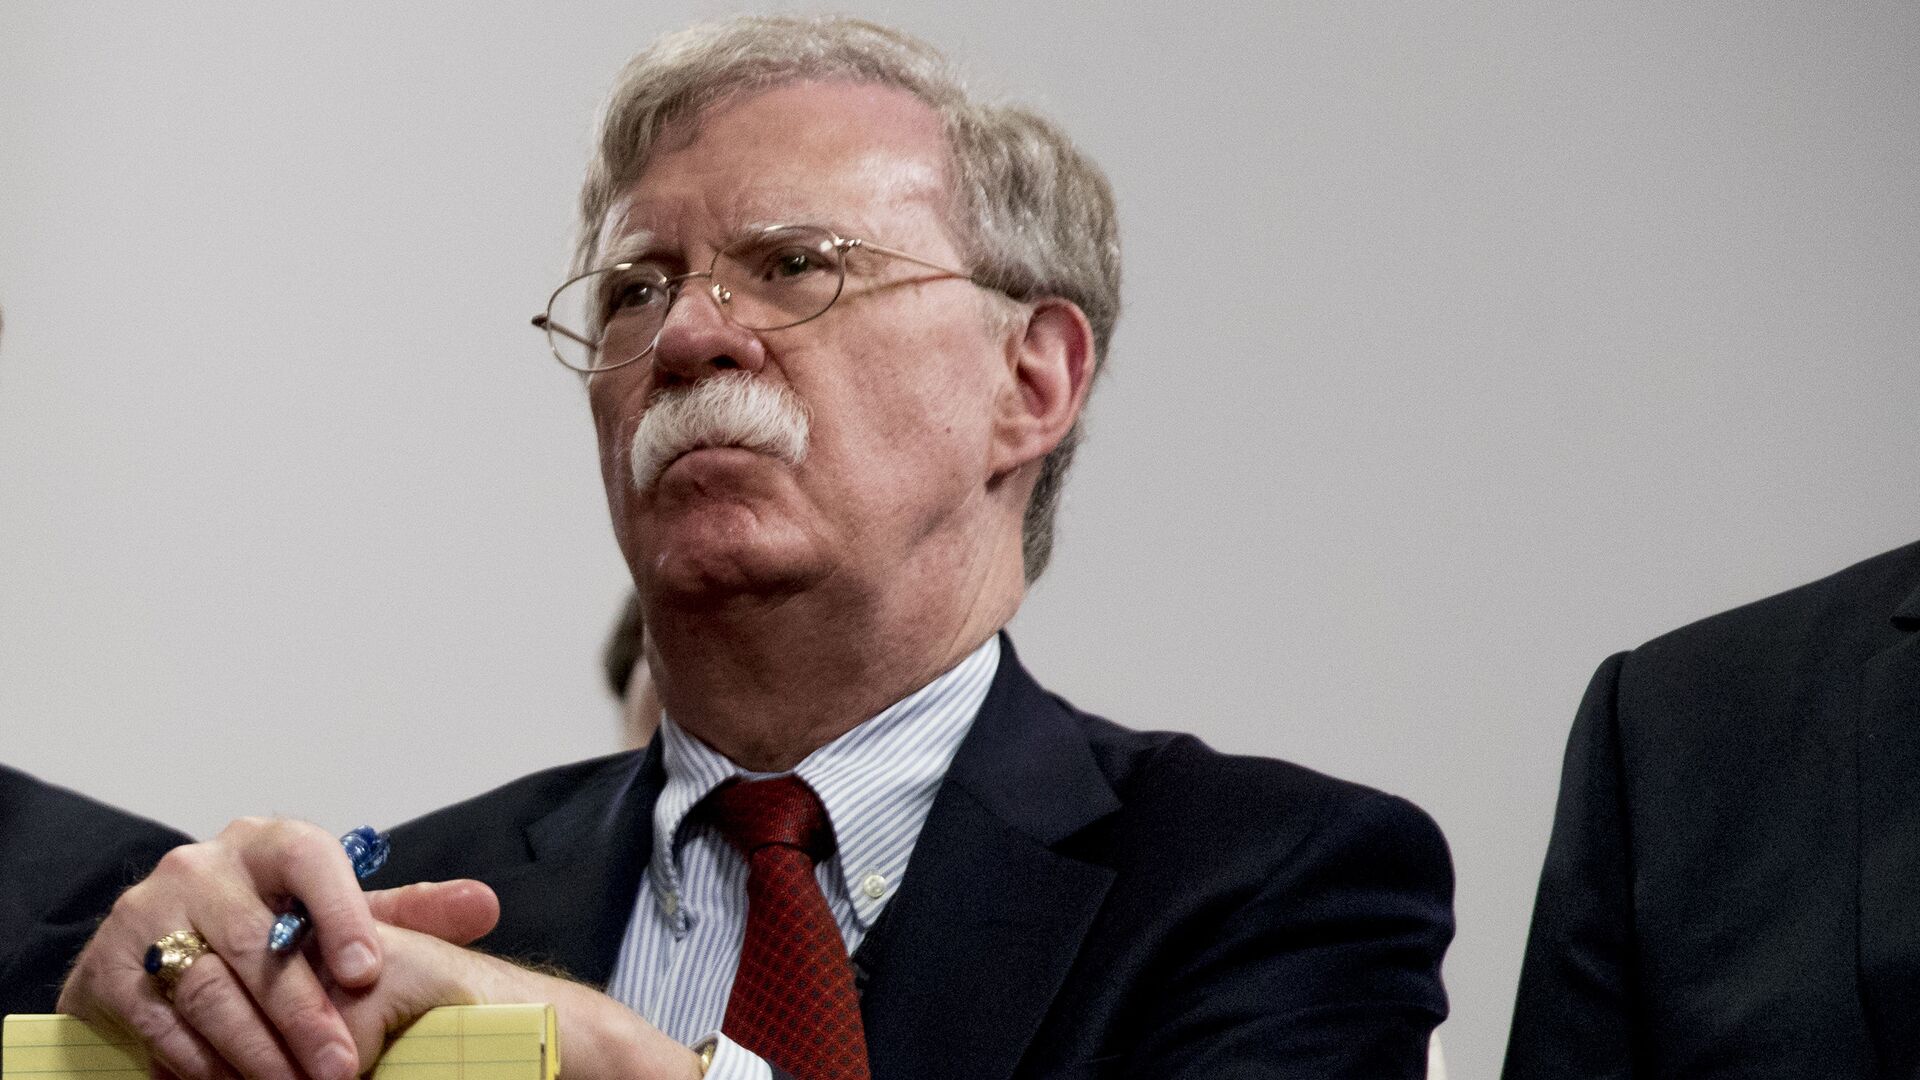 National Security Adviser John Bolton attends a meeting with President Donald Trump as he meets with Indian Prime Minister Narendra Modi at the G-7 summit in Biarritz, France, Monday, Aug. 26, 2019 - Sputnik International, 1920, 16.04.2021